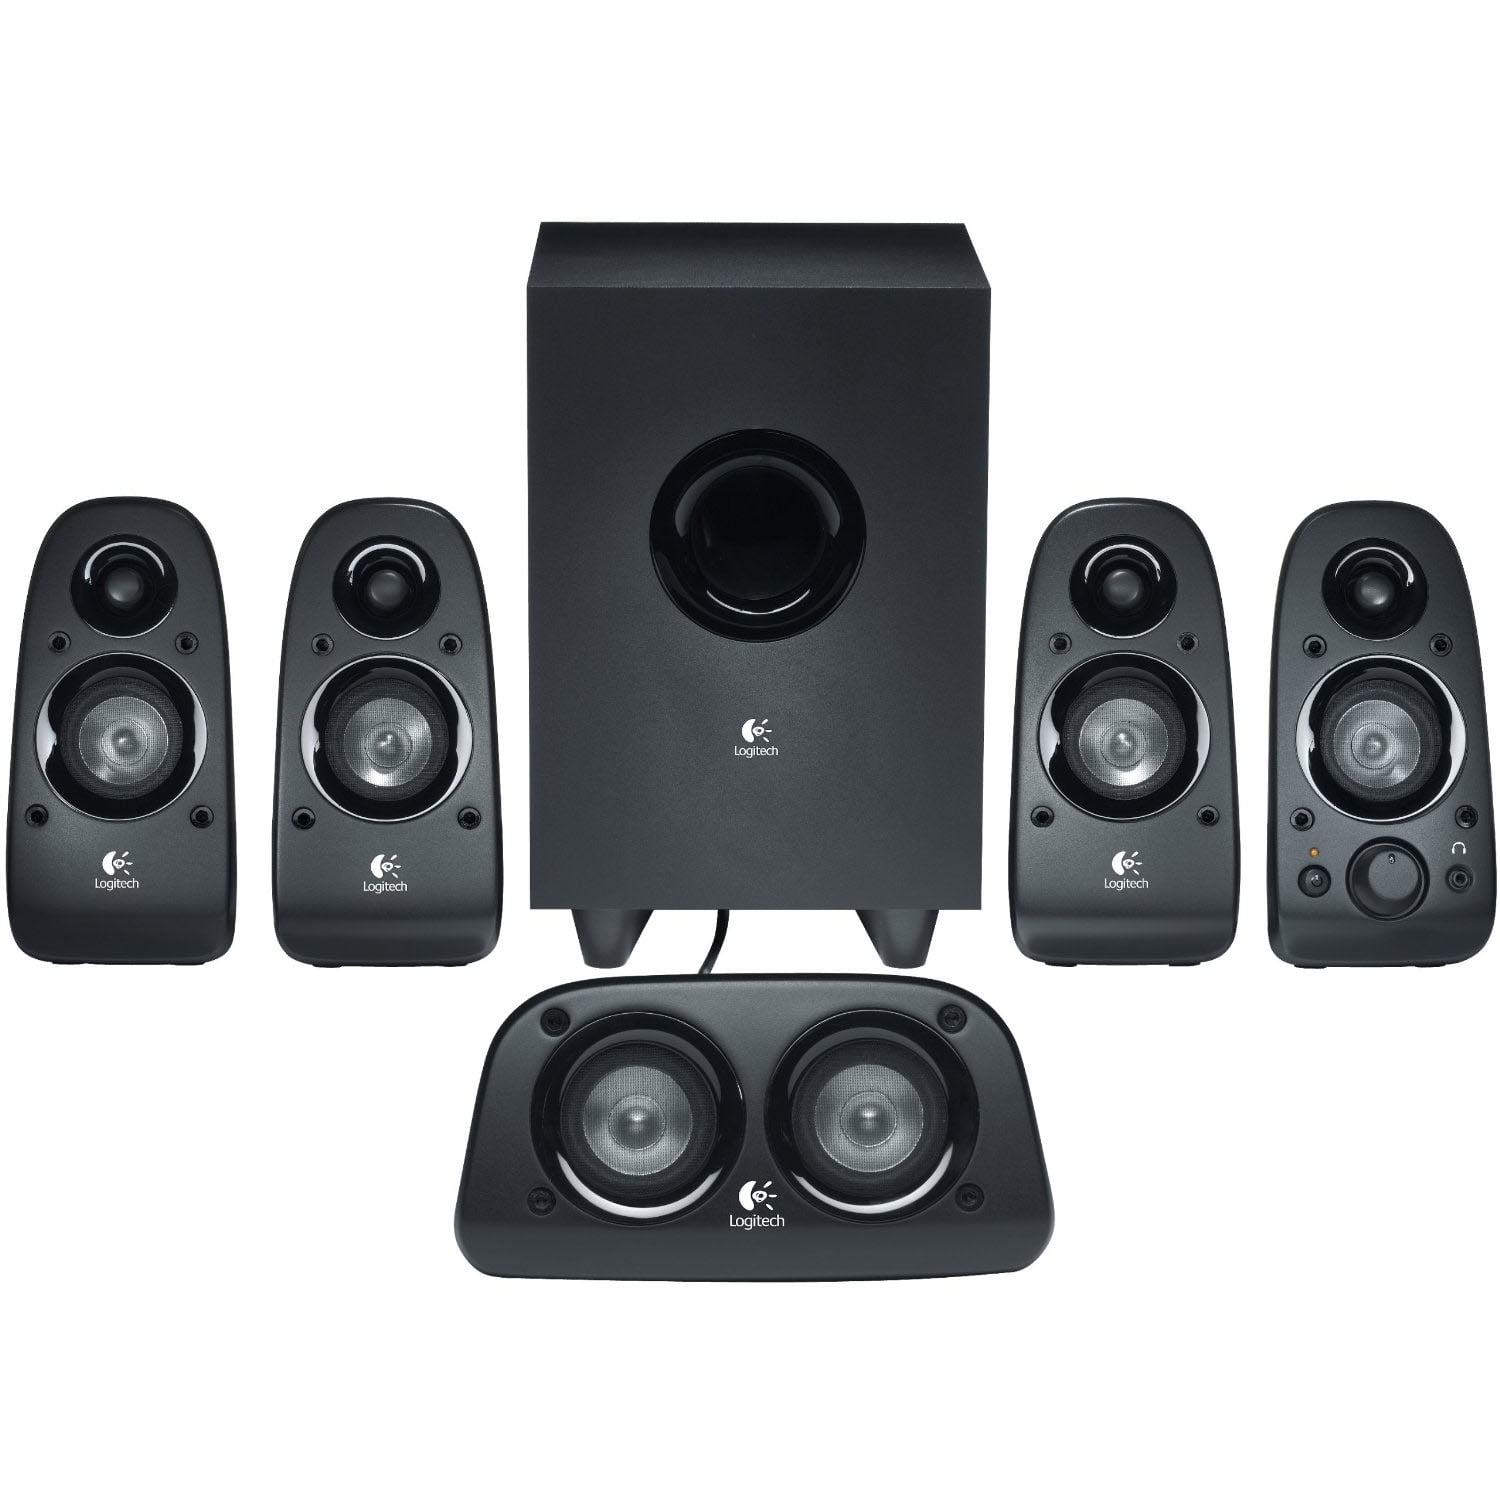 Logitech Z337 Speaker System with Bluetooth review: Good sound and great  connectivity